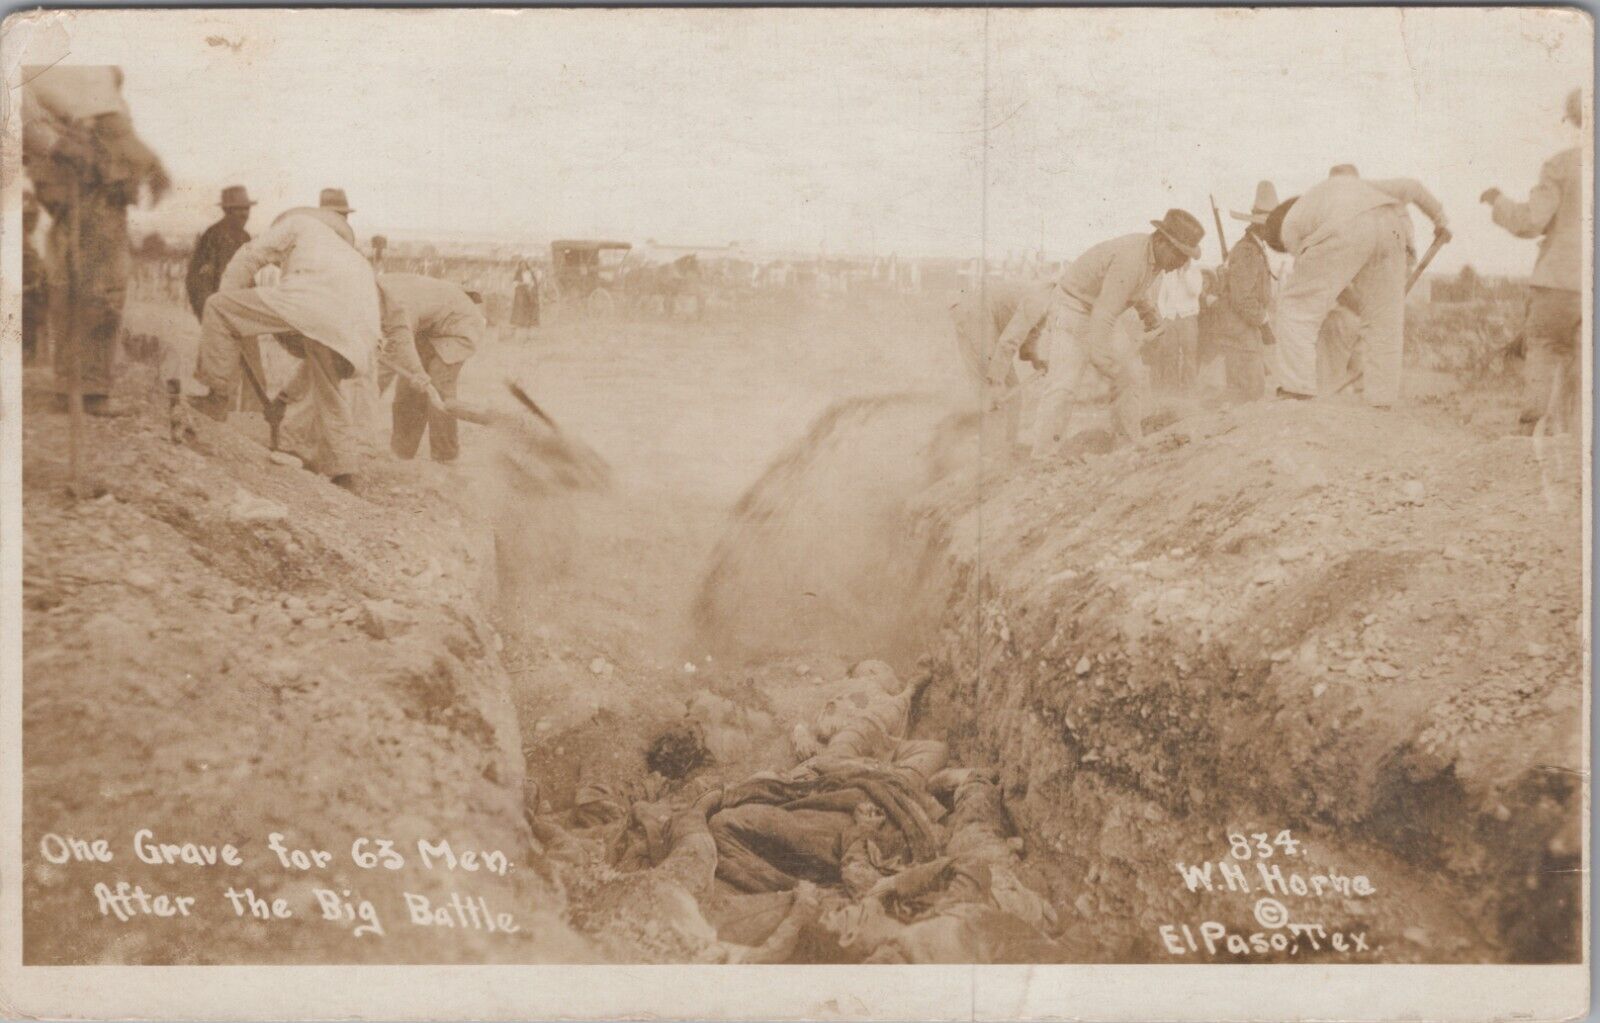 RPPC Wm Horne Mexican Revolution Burying Dead Bodies Trench #834 PC c1910s 8164a